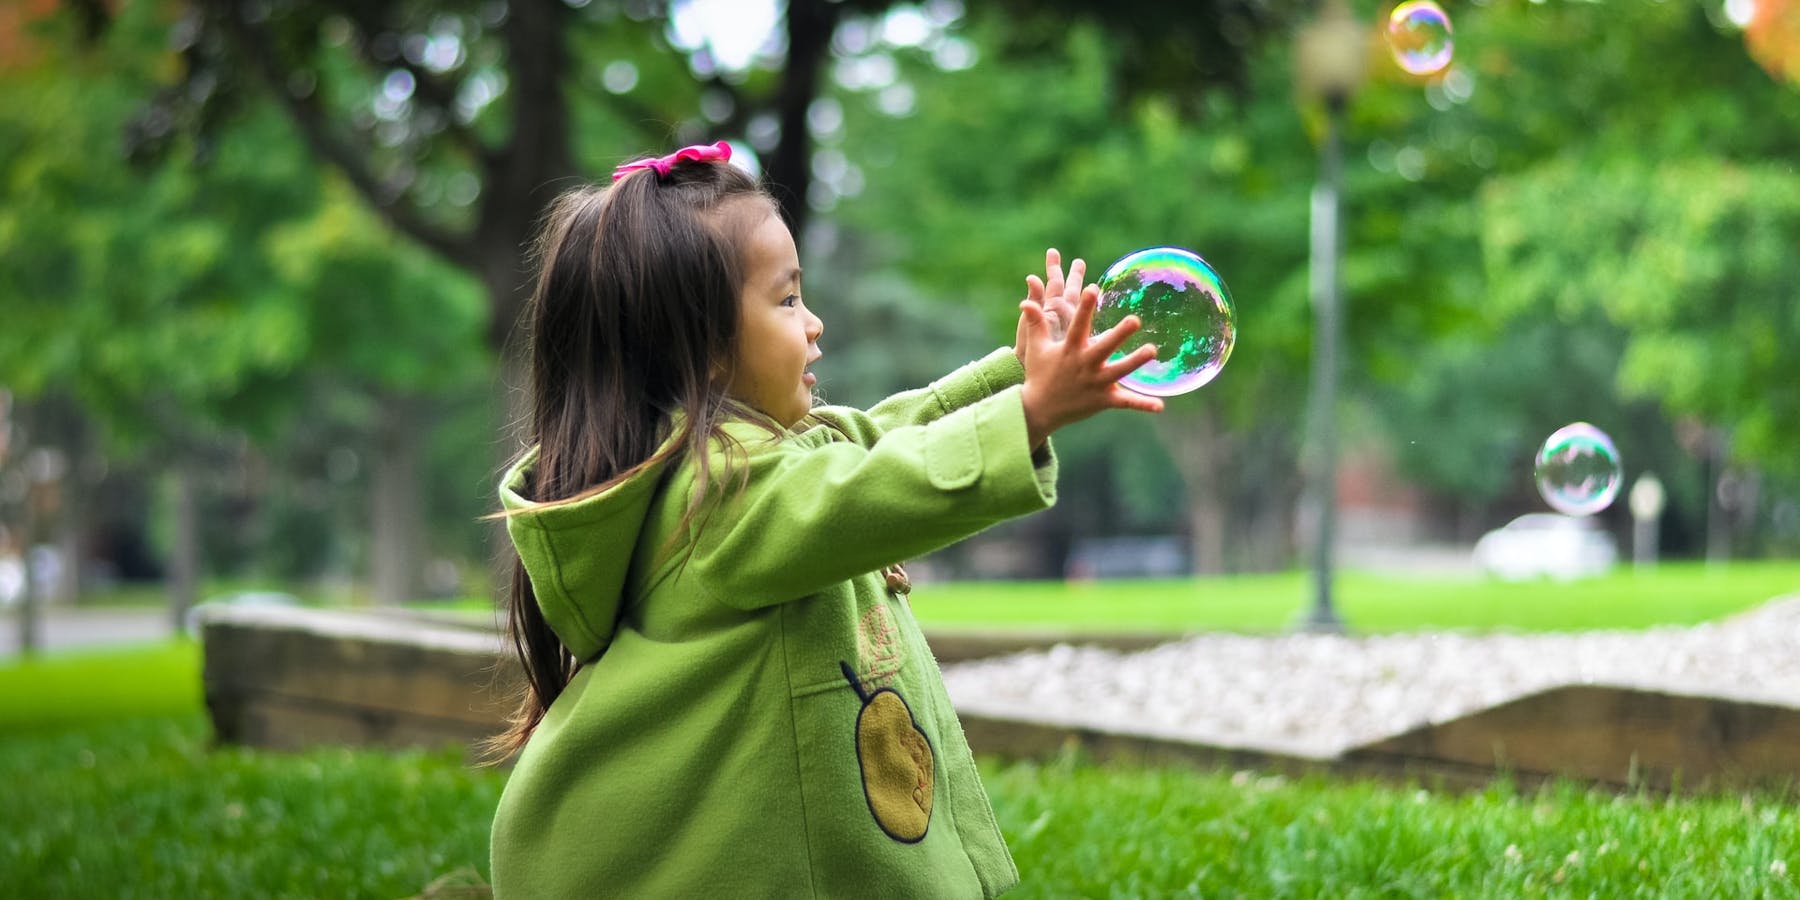 Girl playing with bubble outdoors.